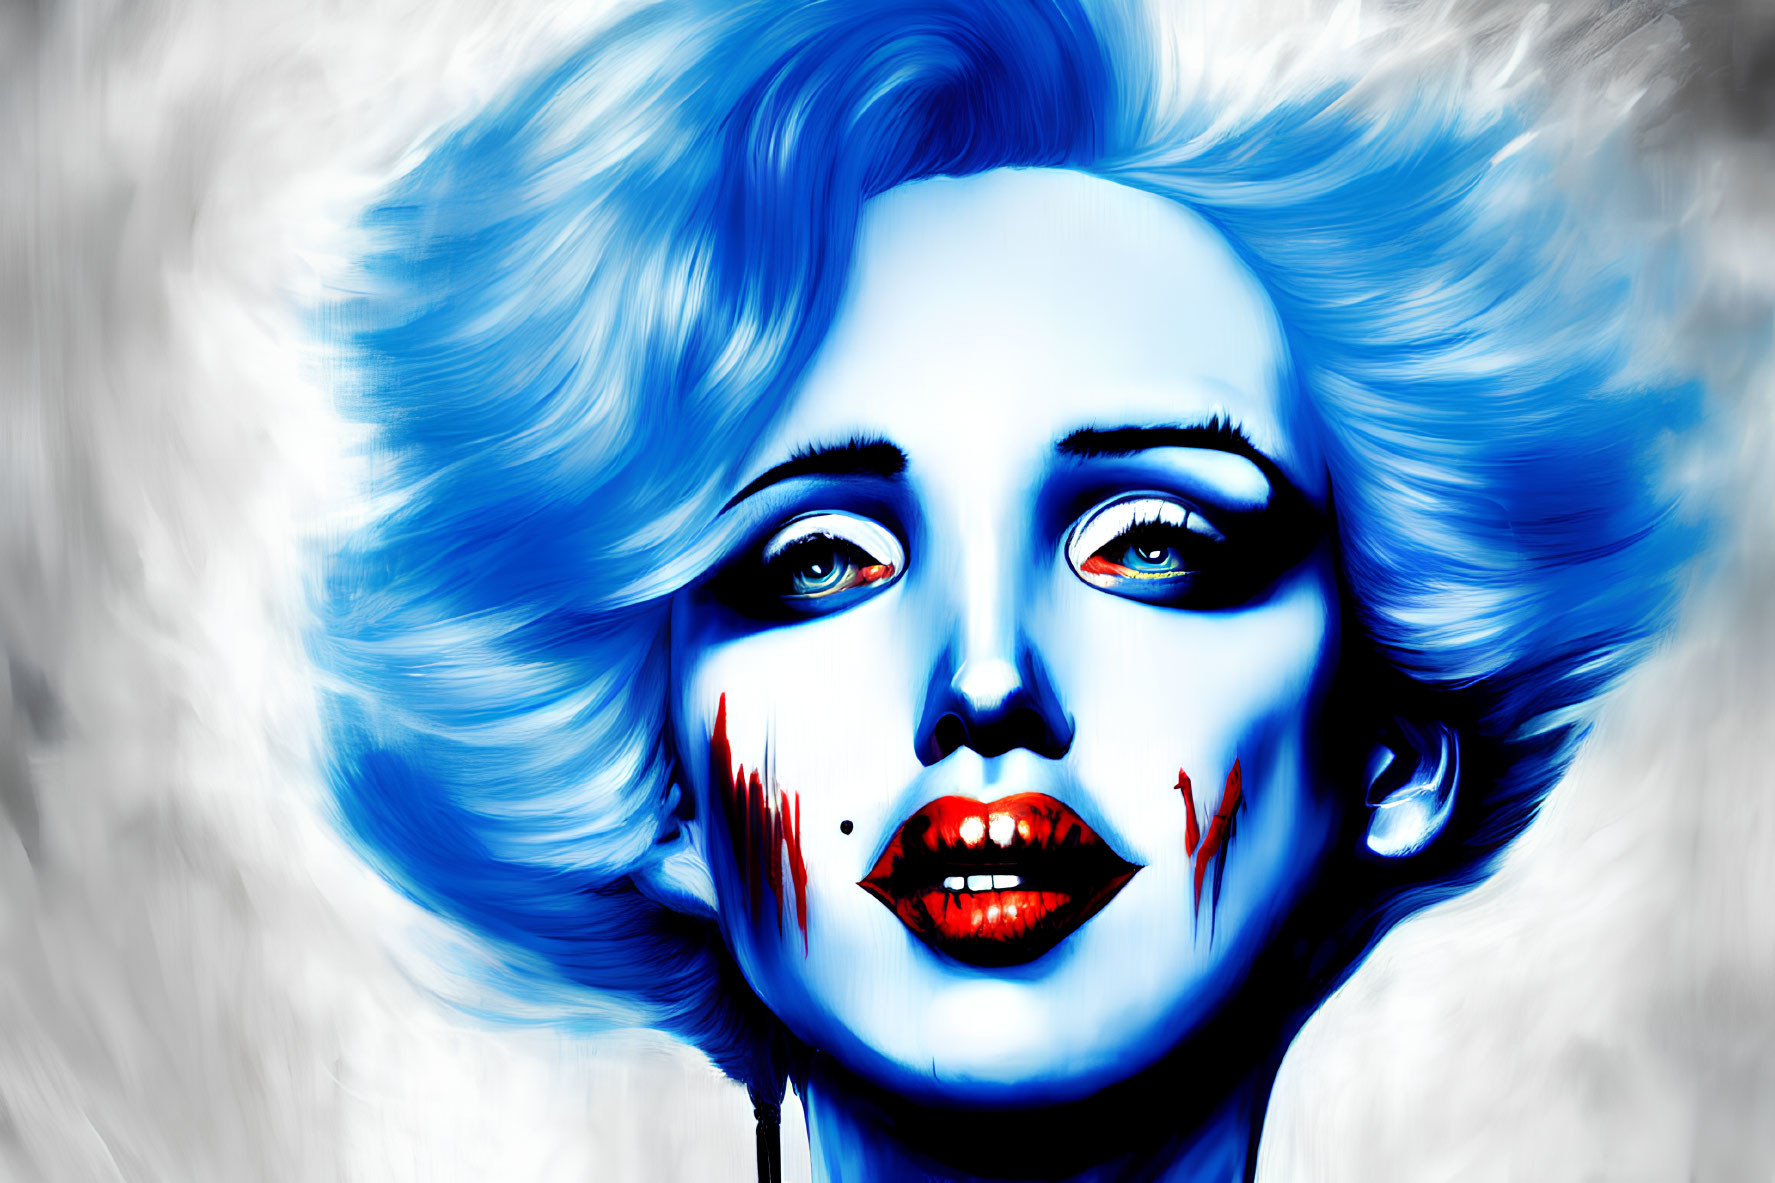 Artistic portrait of a woman with blue hair, red eyes, and red lipstick on monochrome backdrop